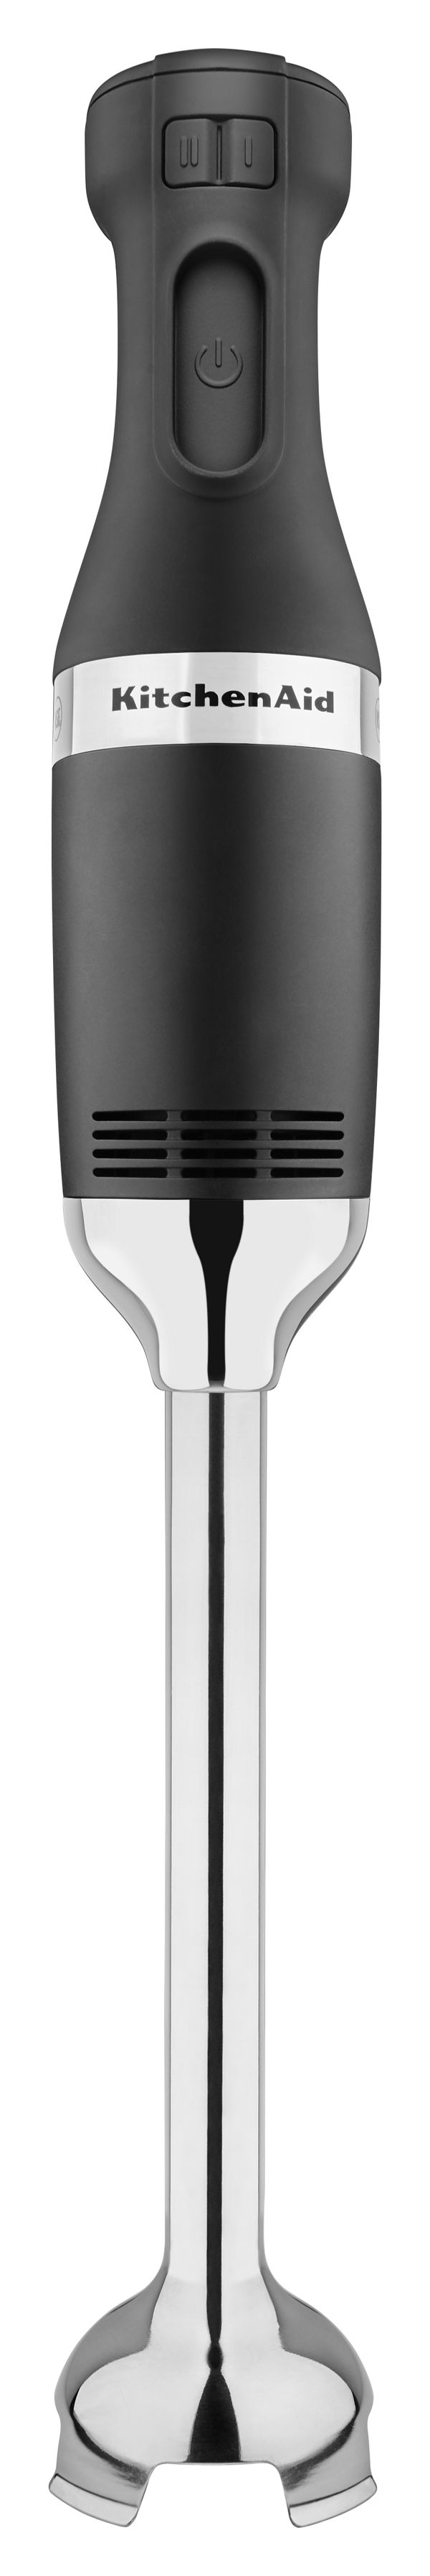 KitchenAid&reg; 300 Series NSF&reg; Certified Commercial Immersion Blender with 12&quot; Blending Arm